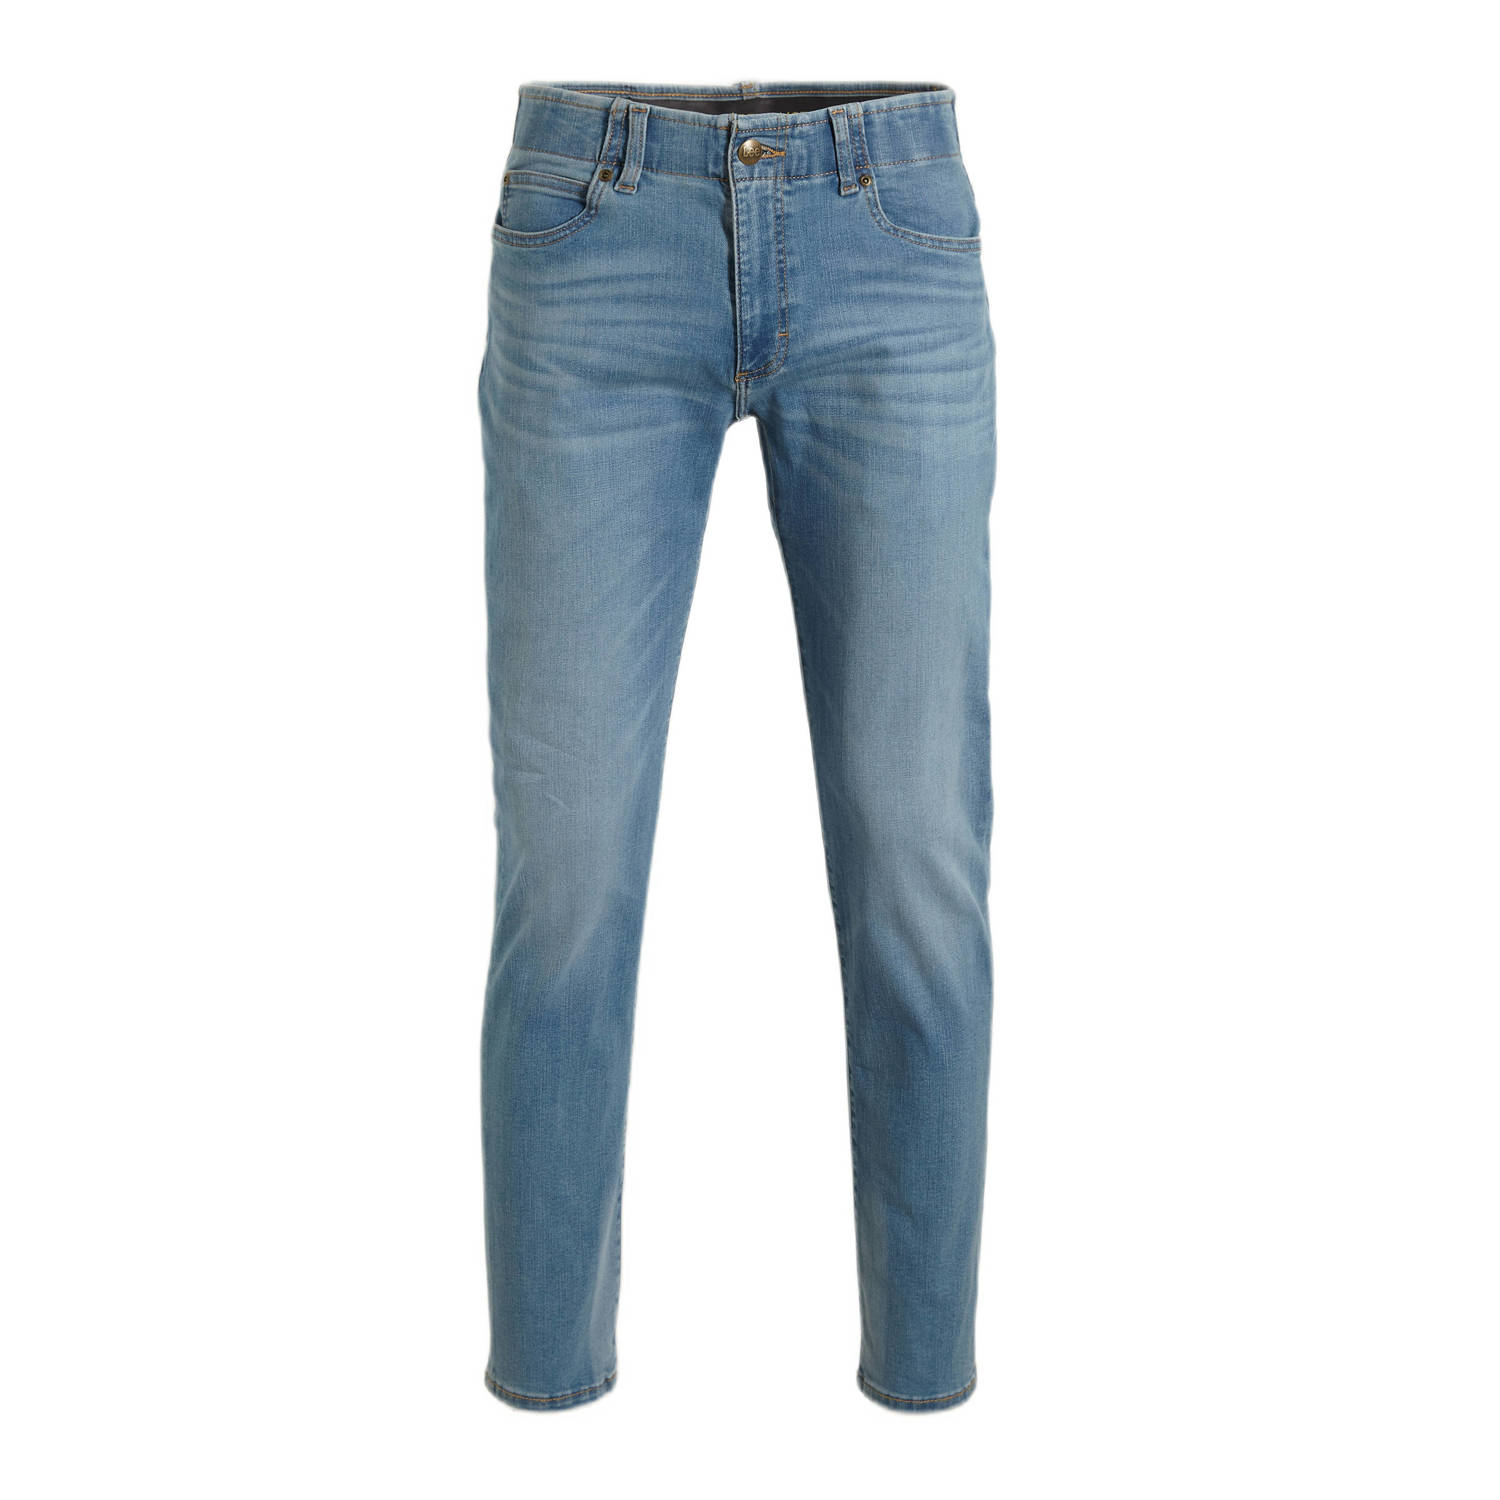 Lee straight fit jeans jaire